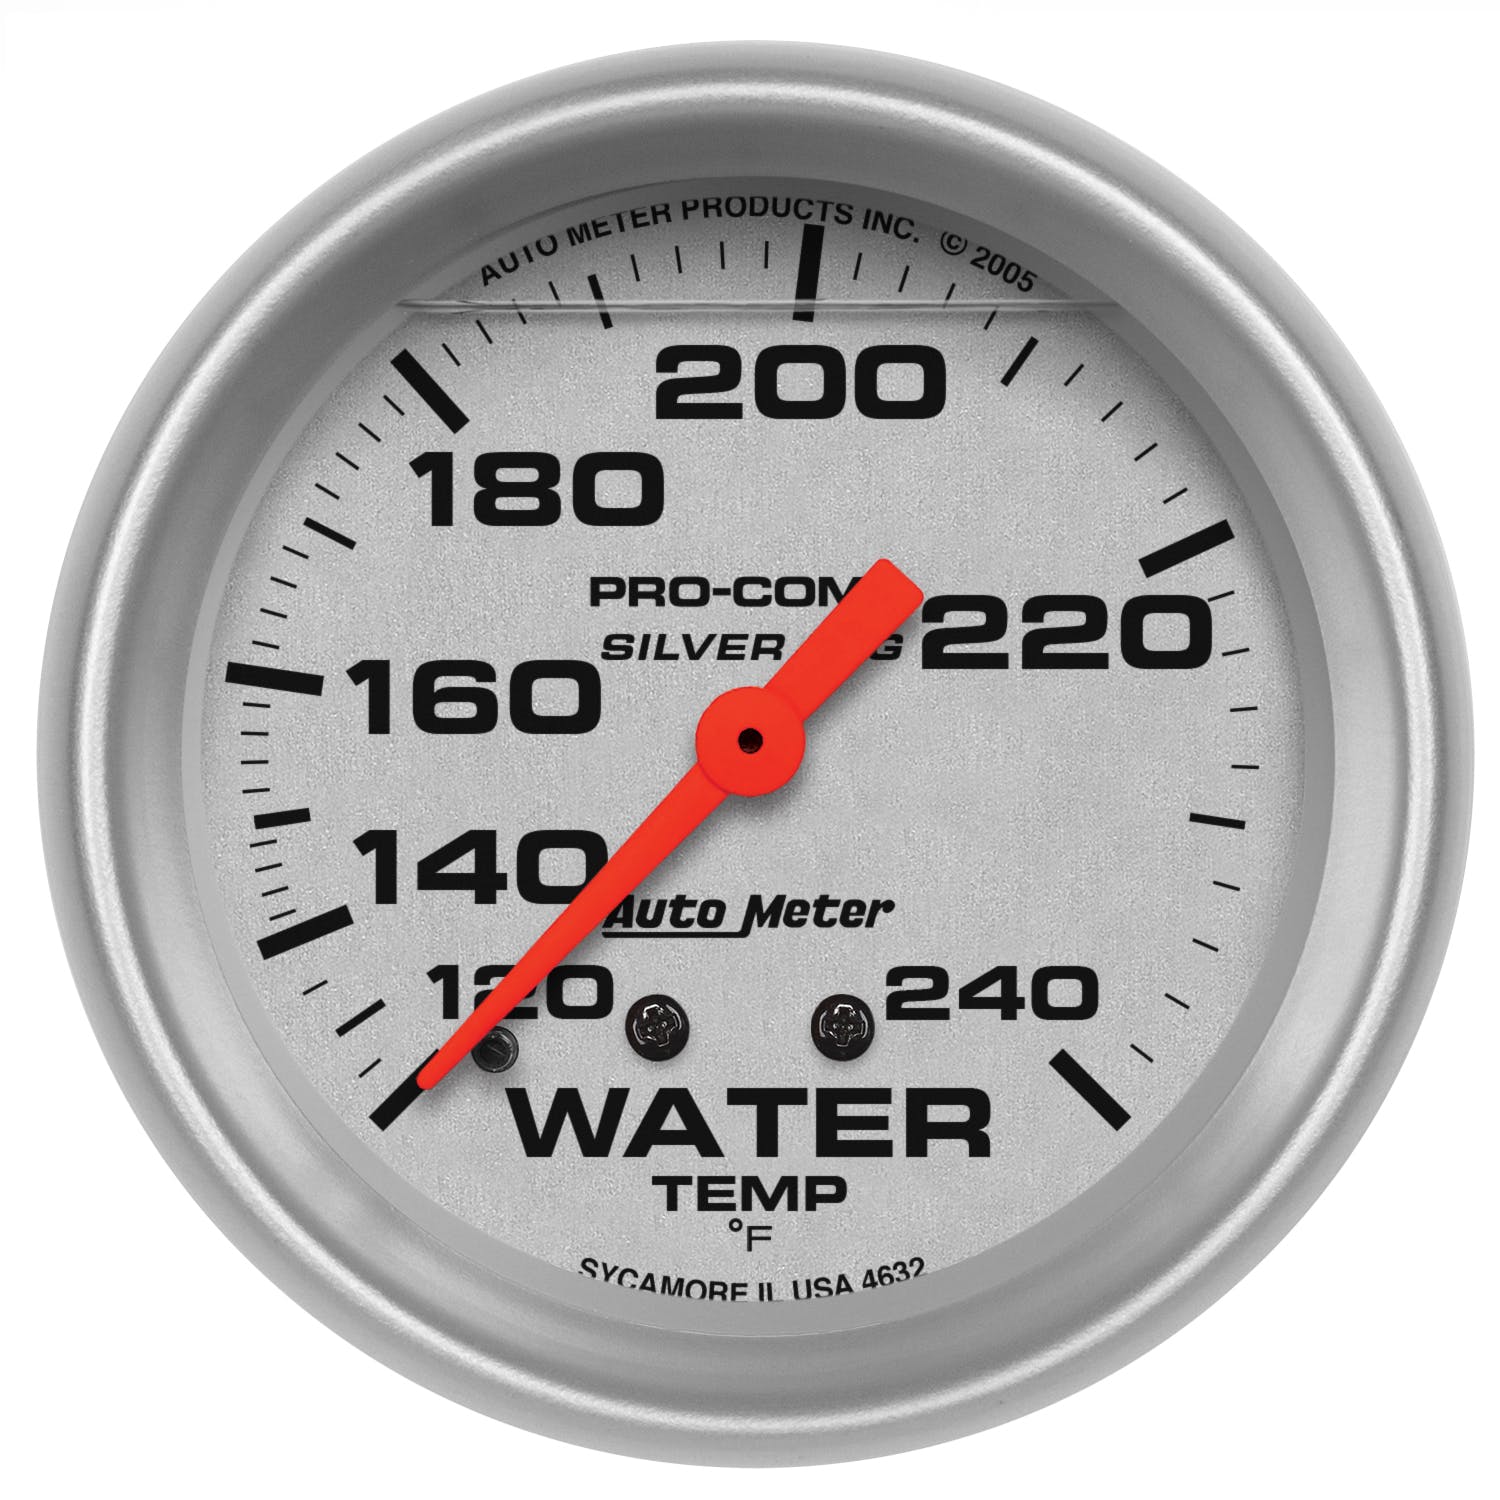 AutoMeter Products 4632 Water Temp 120-240 F LFG